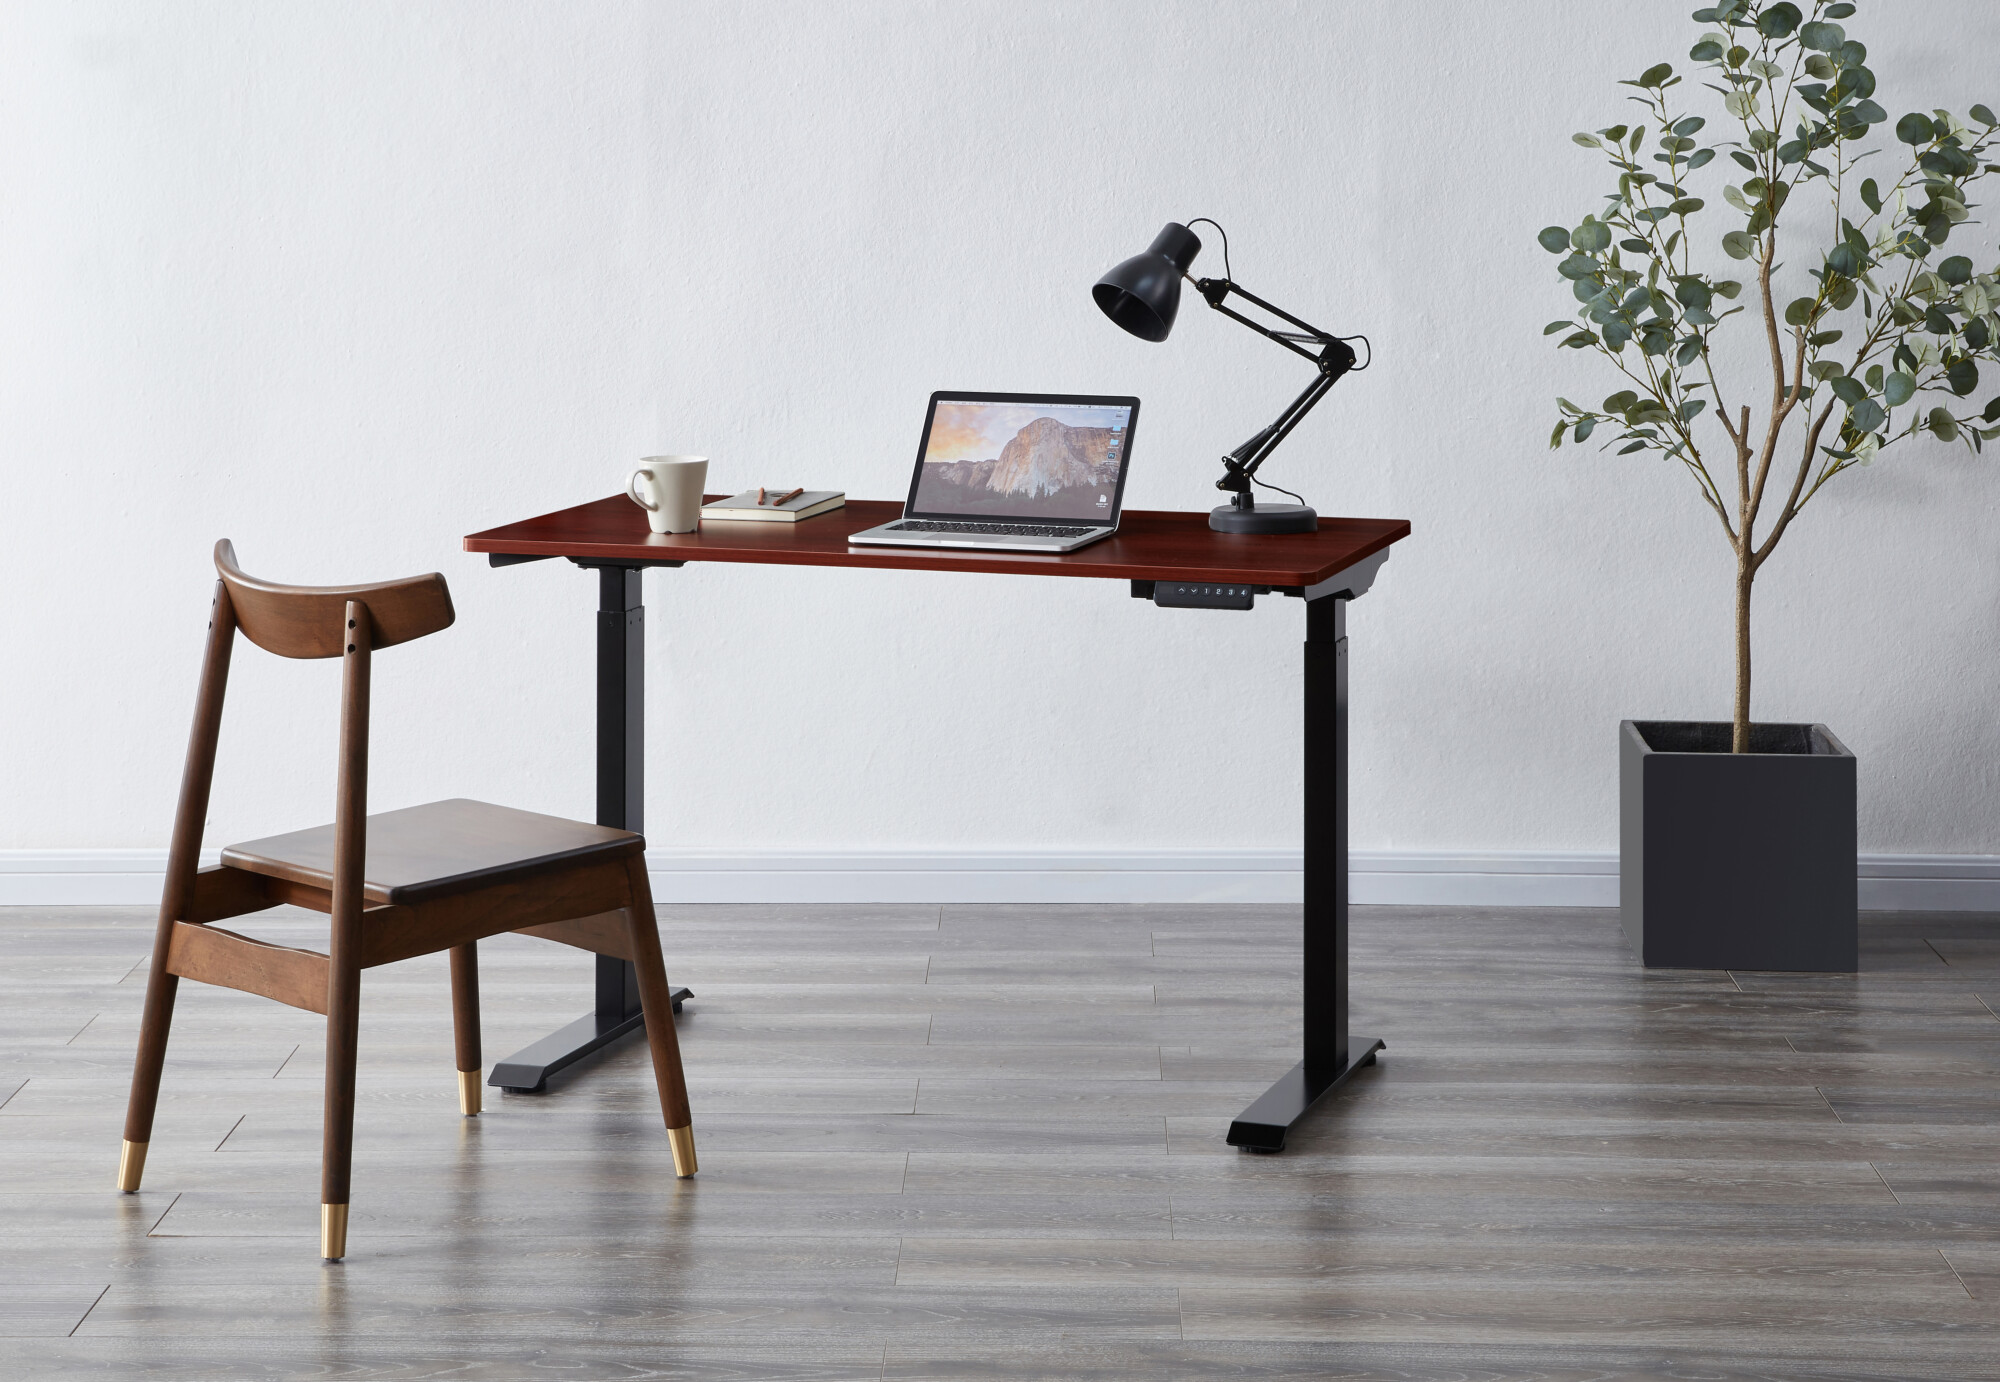 Standing desk with a mahogany desk top and black steel legs